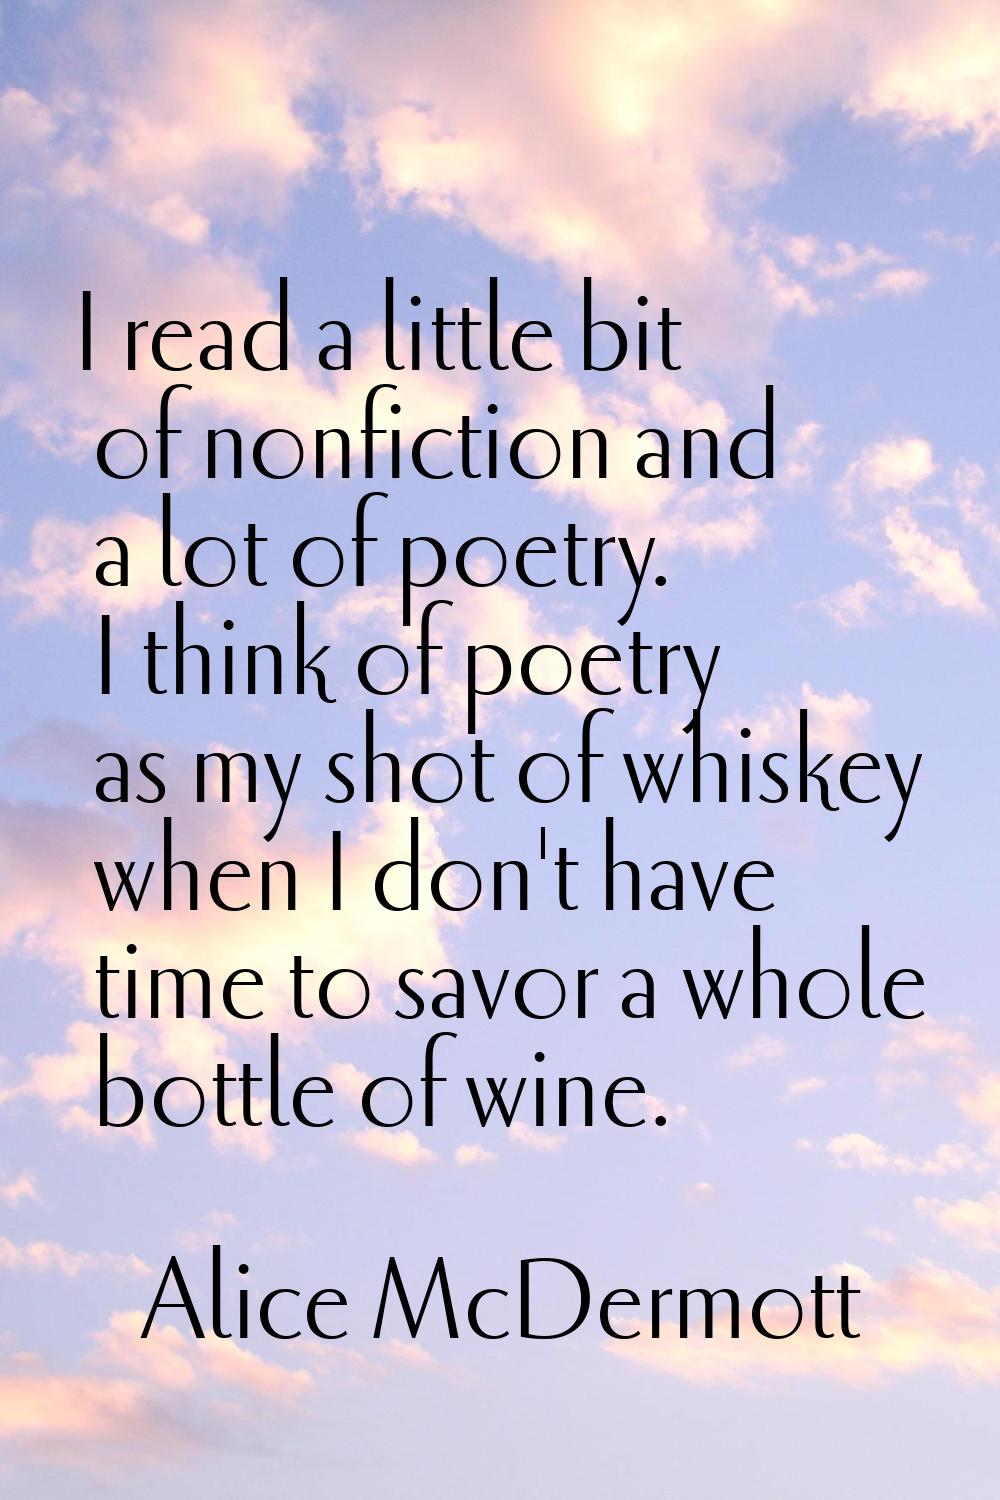 I read a little bit of nonfiction and a lot of poetry. I think of poetry as my shot of whiskey when